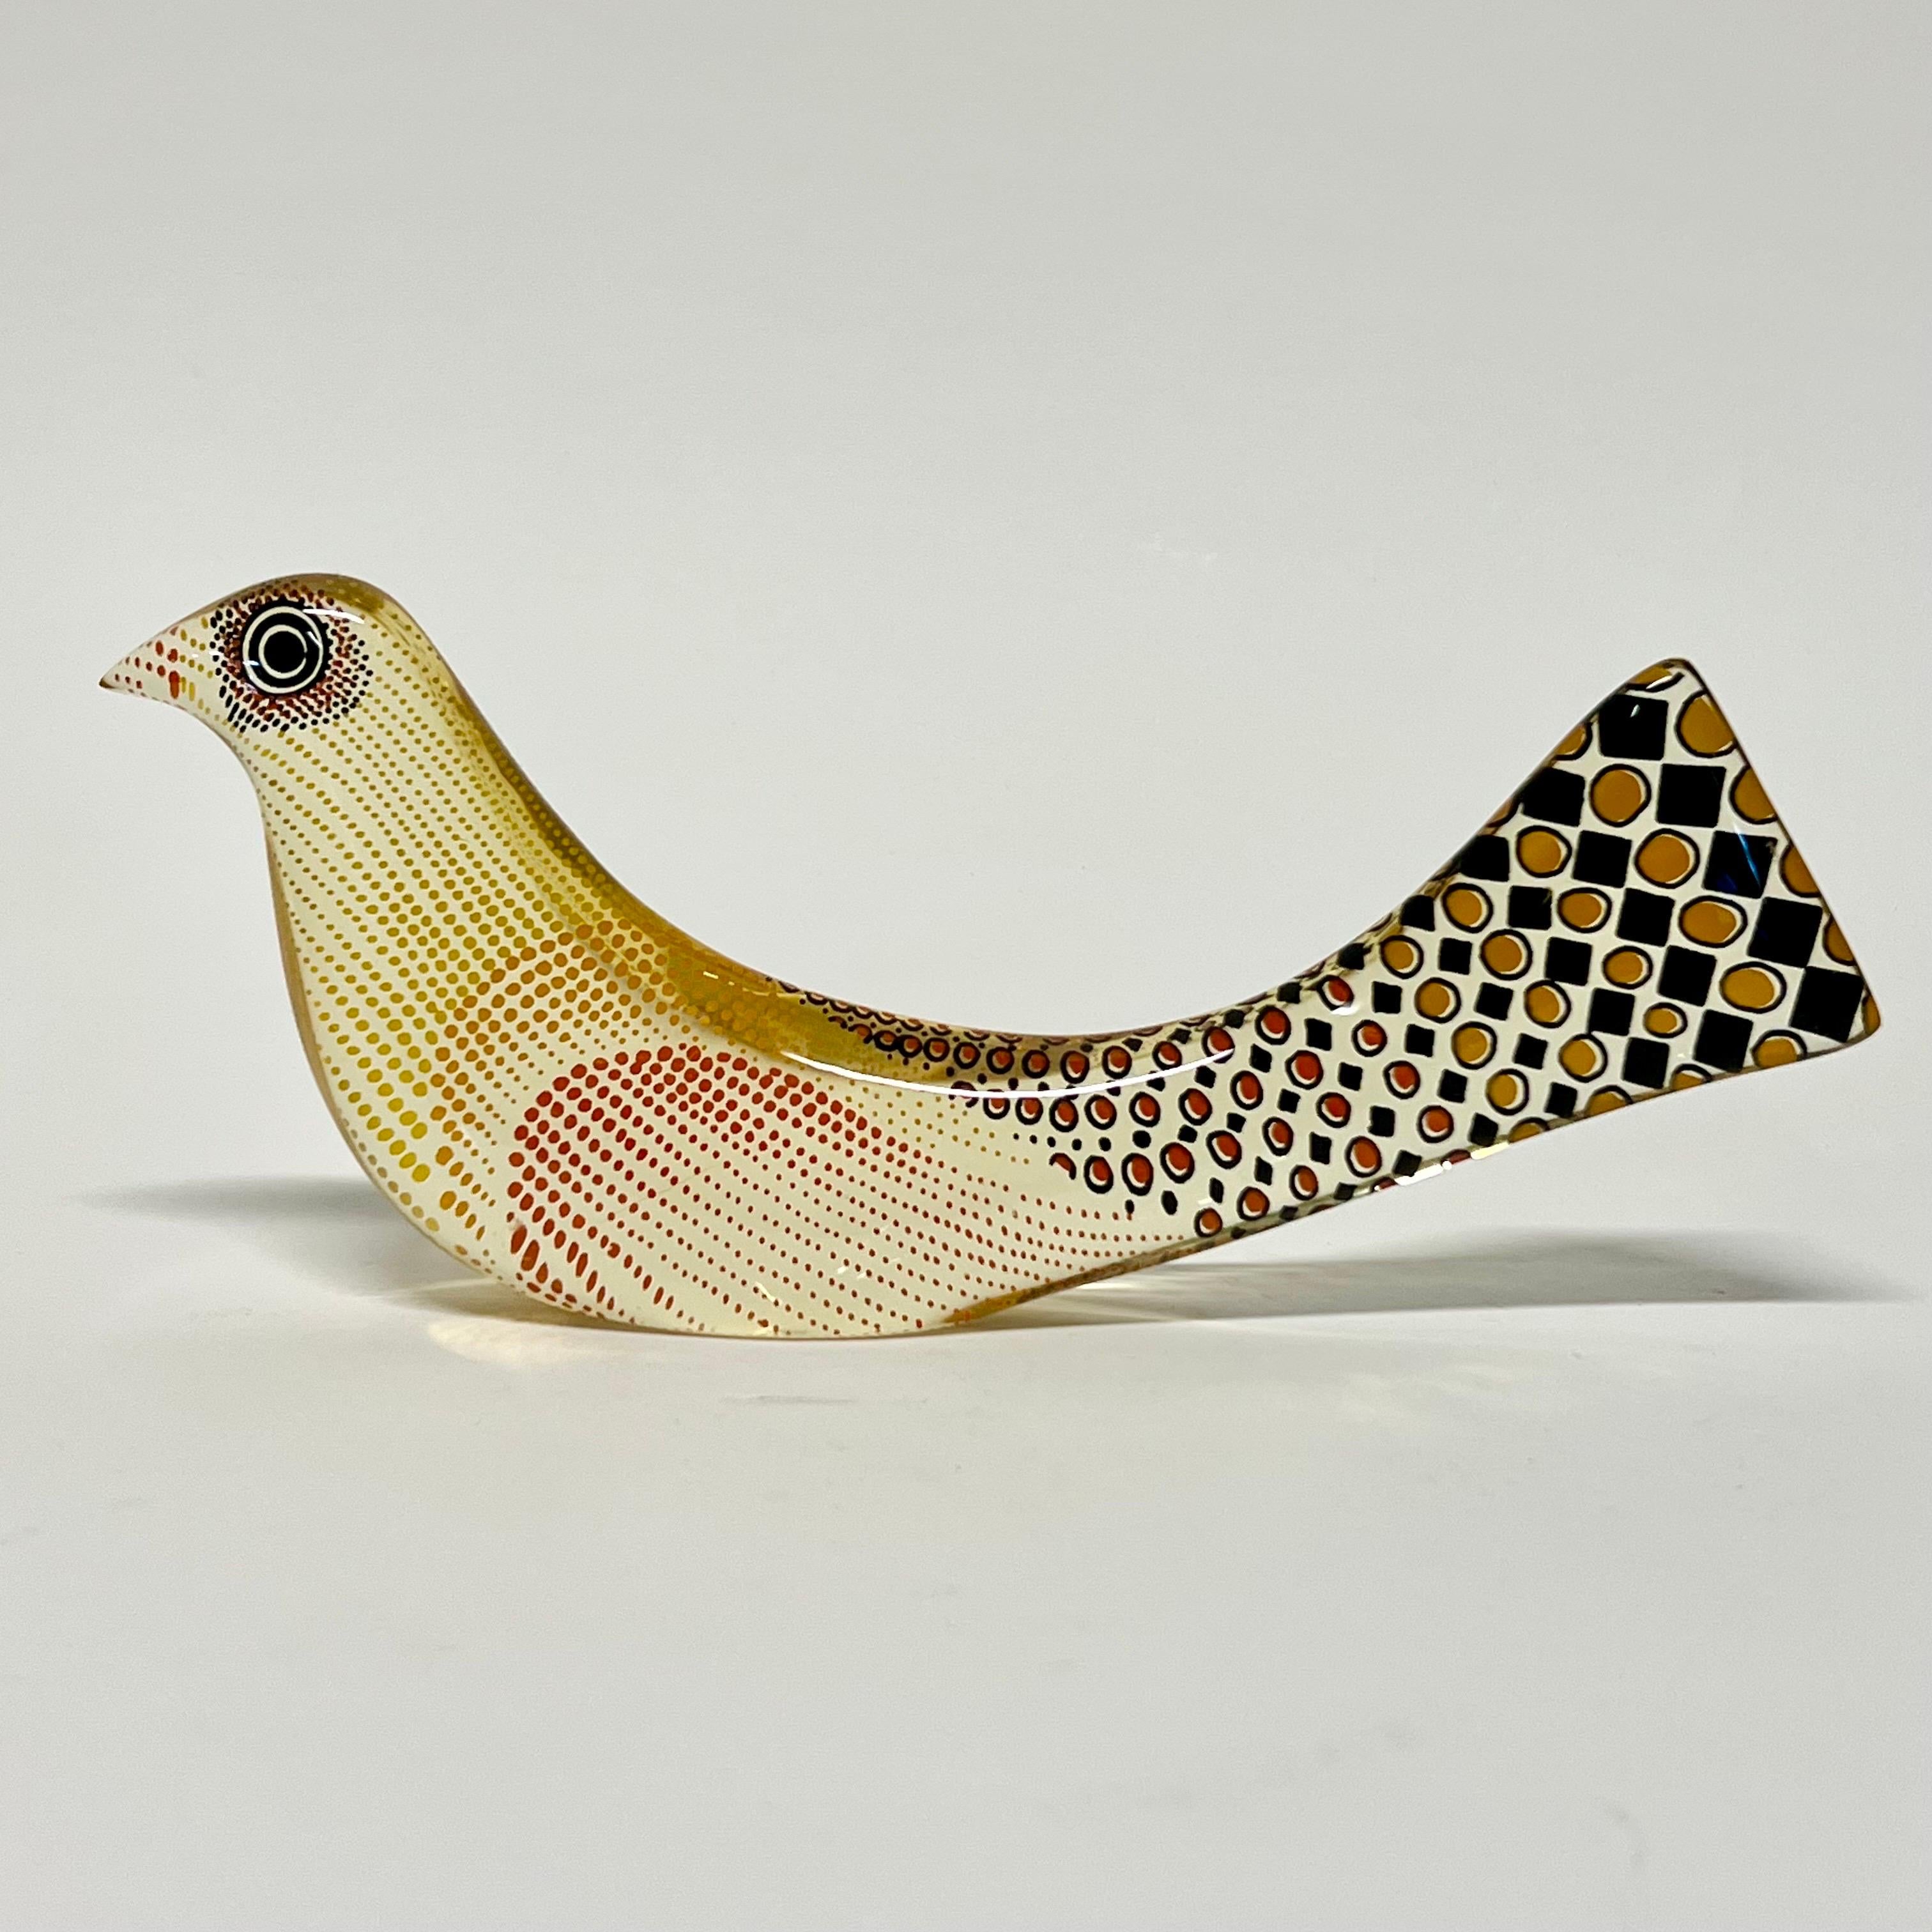 Rare long-tailed bird by famous Brazilian artist/designer Abraham Palatnik c1960s. 

The Brazilian artist Abraham Palatnik (1928) was the founder of the technological movement in Brazilian art, and a Pioneer in making Kinetic sculptures.
In the late